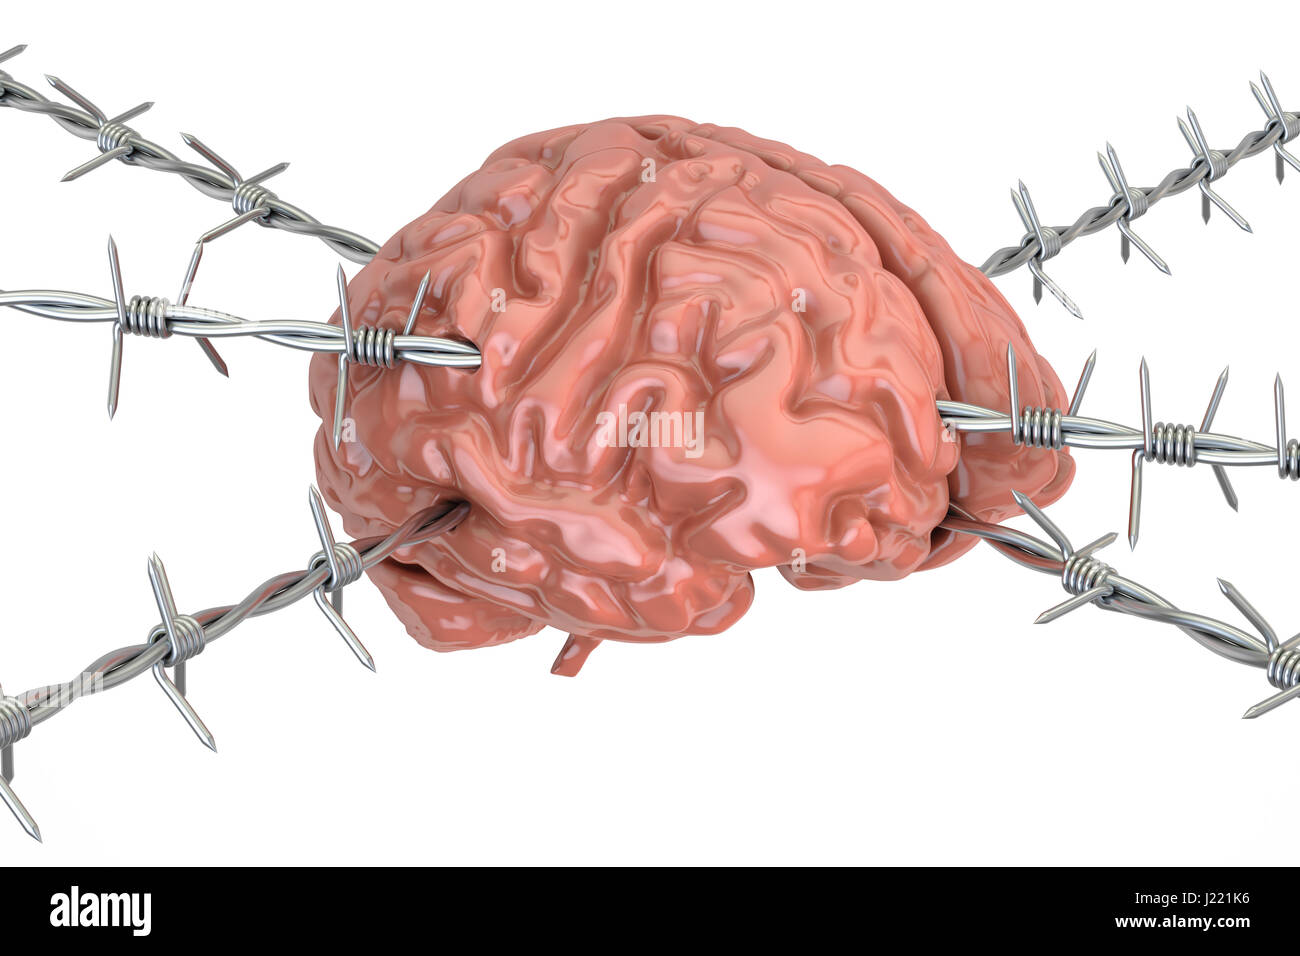 Human Brain pierced with barbed wire, 3D rendering isolated on white background Stock Photo